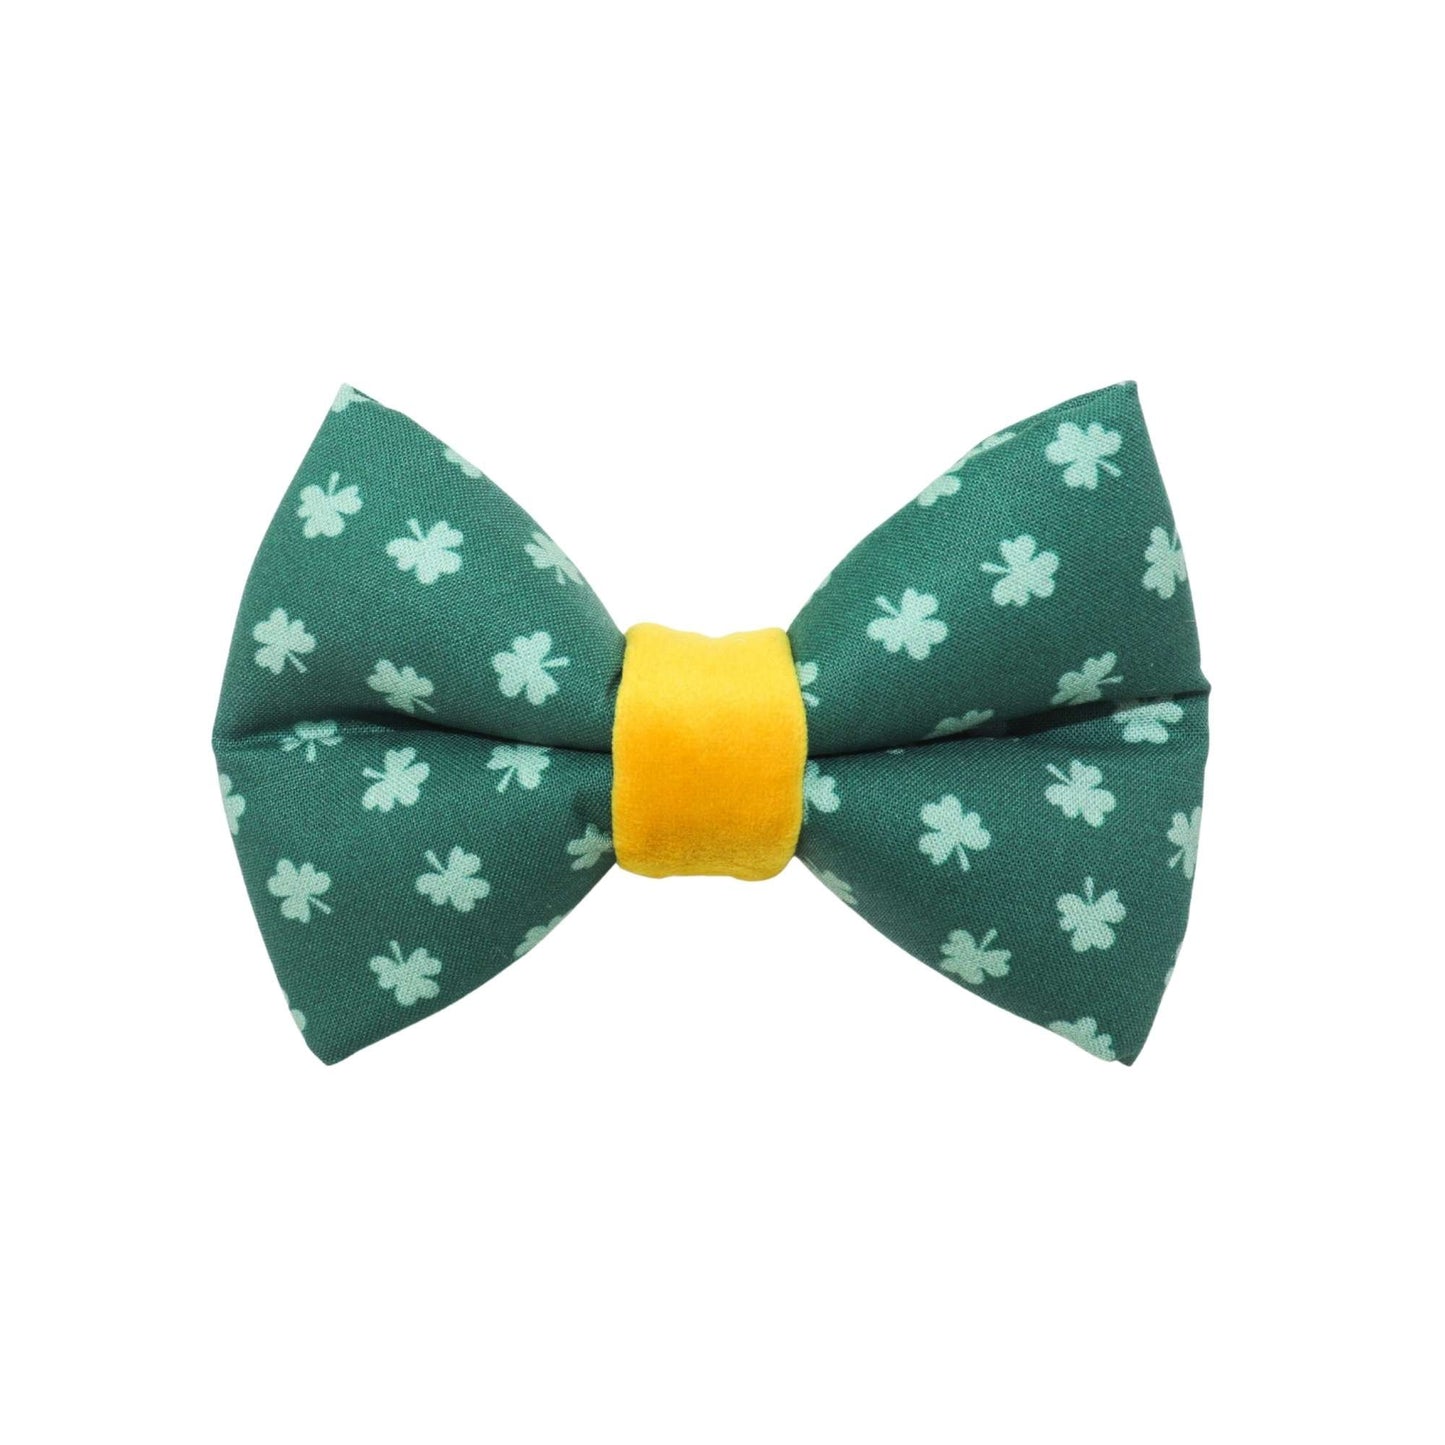 "Pinch Proof" Bow tie